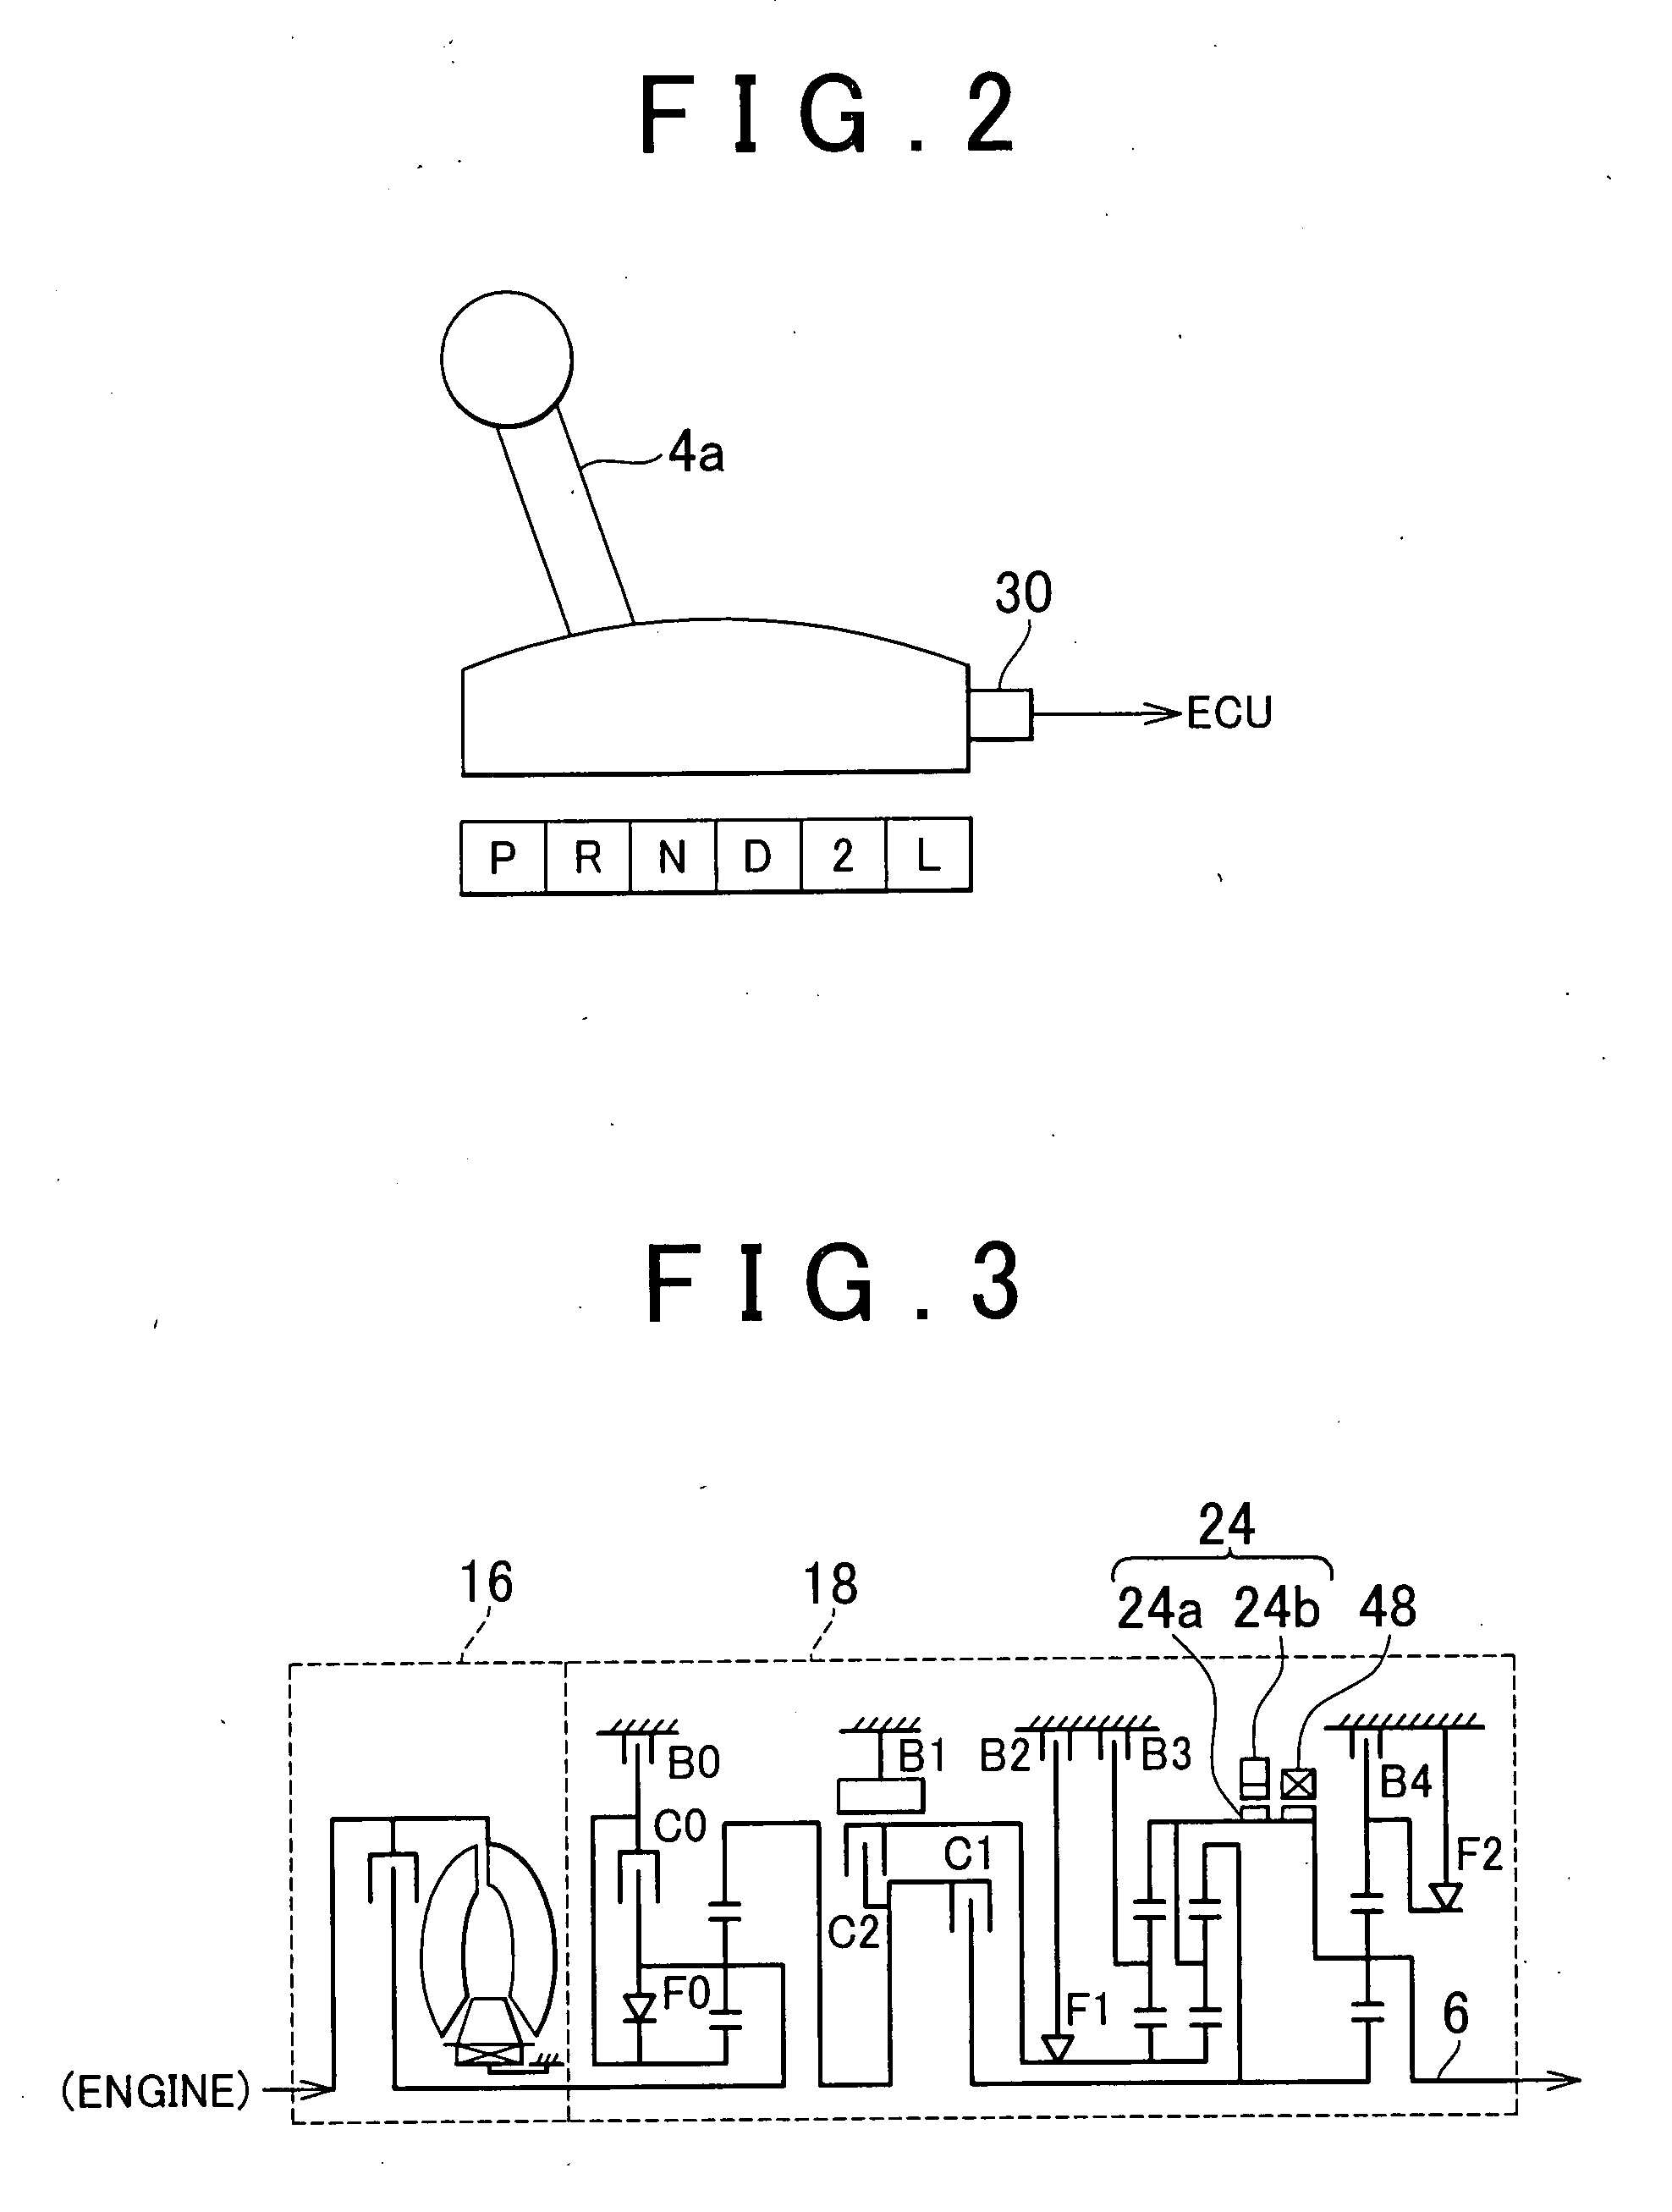 Apparatus for facilitating release of the parking lock